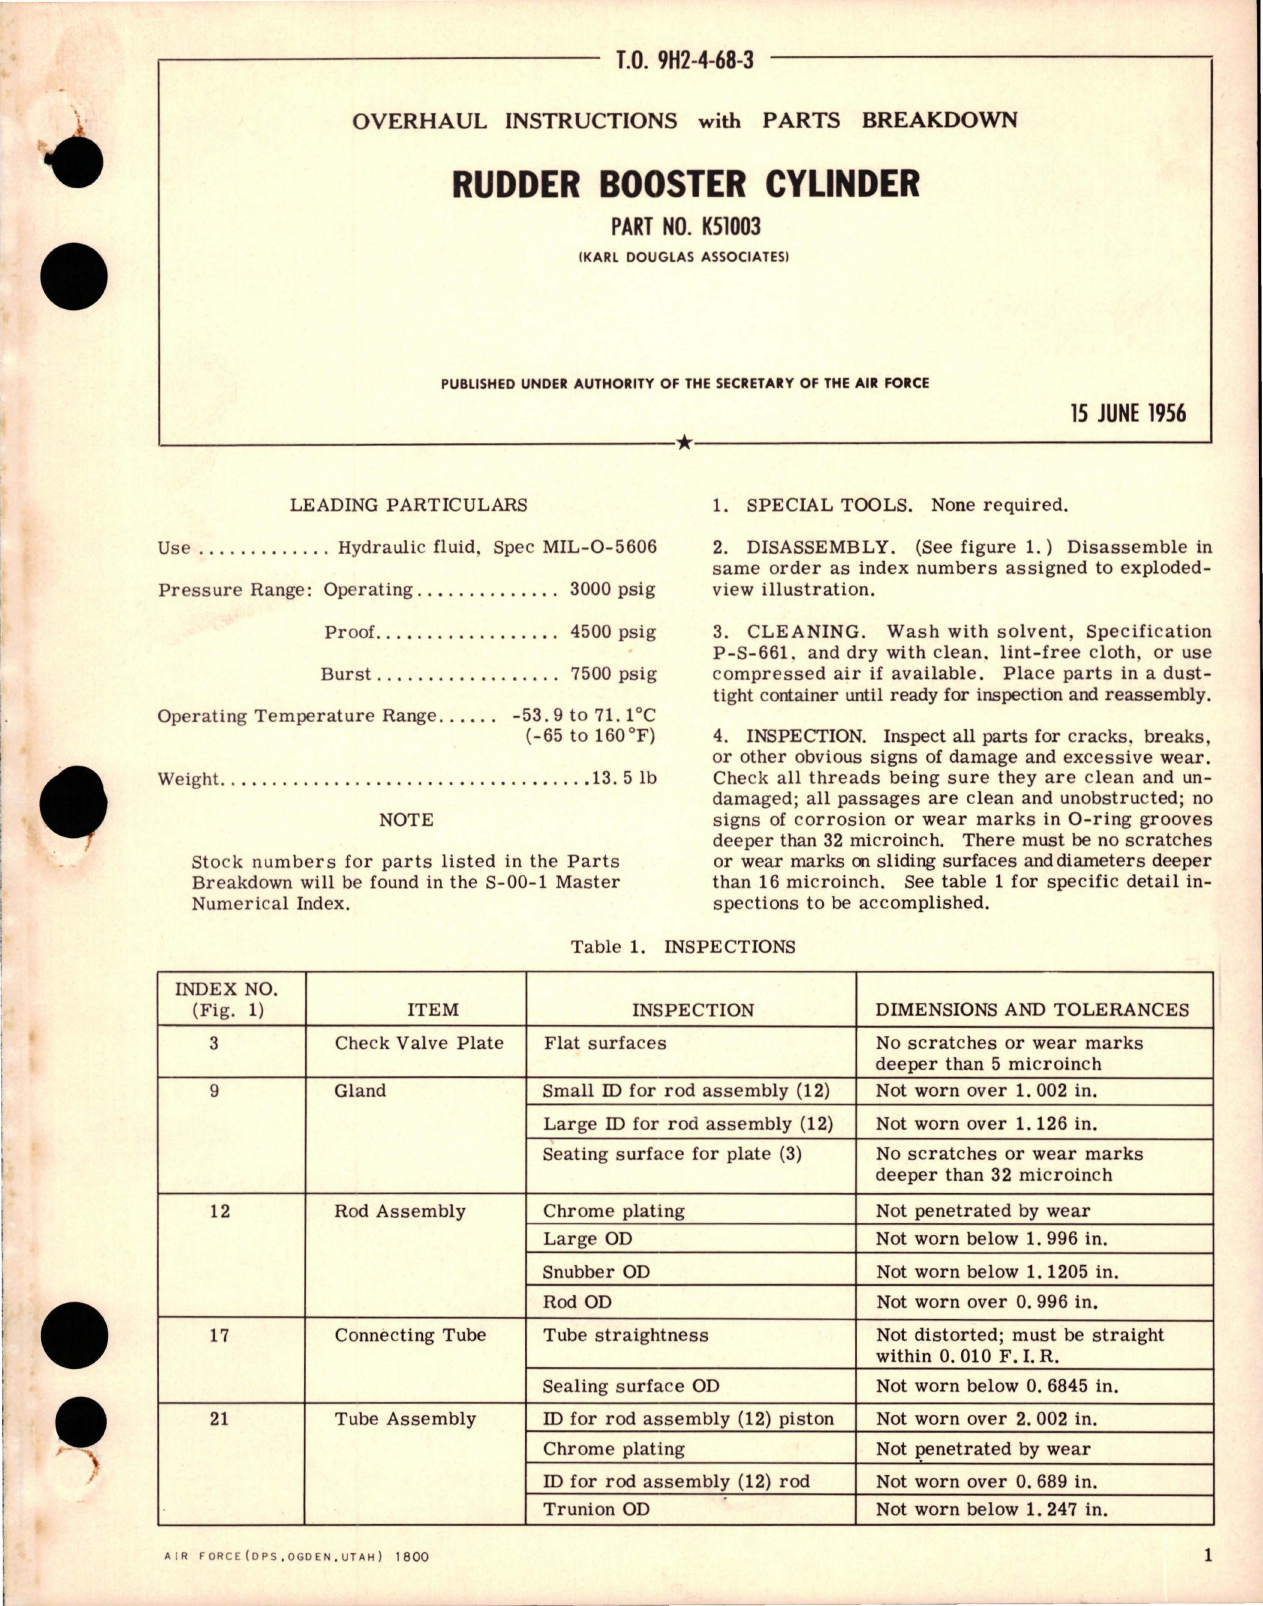 Sample page 1 from AirCorps Library document: Overhaul Instructions with Parts Breakdown for Rudder Booster Cylinder - Part K51003 